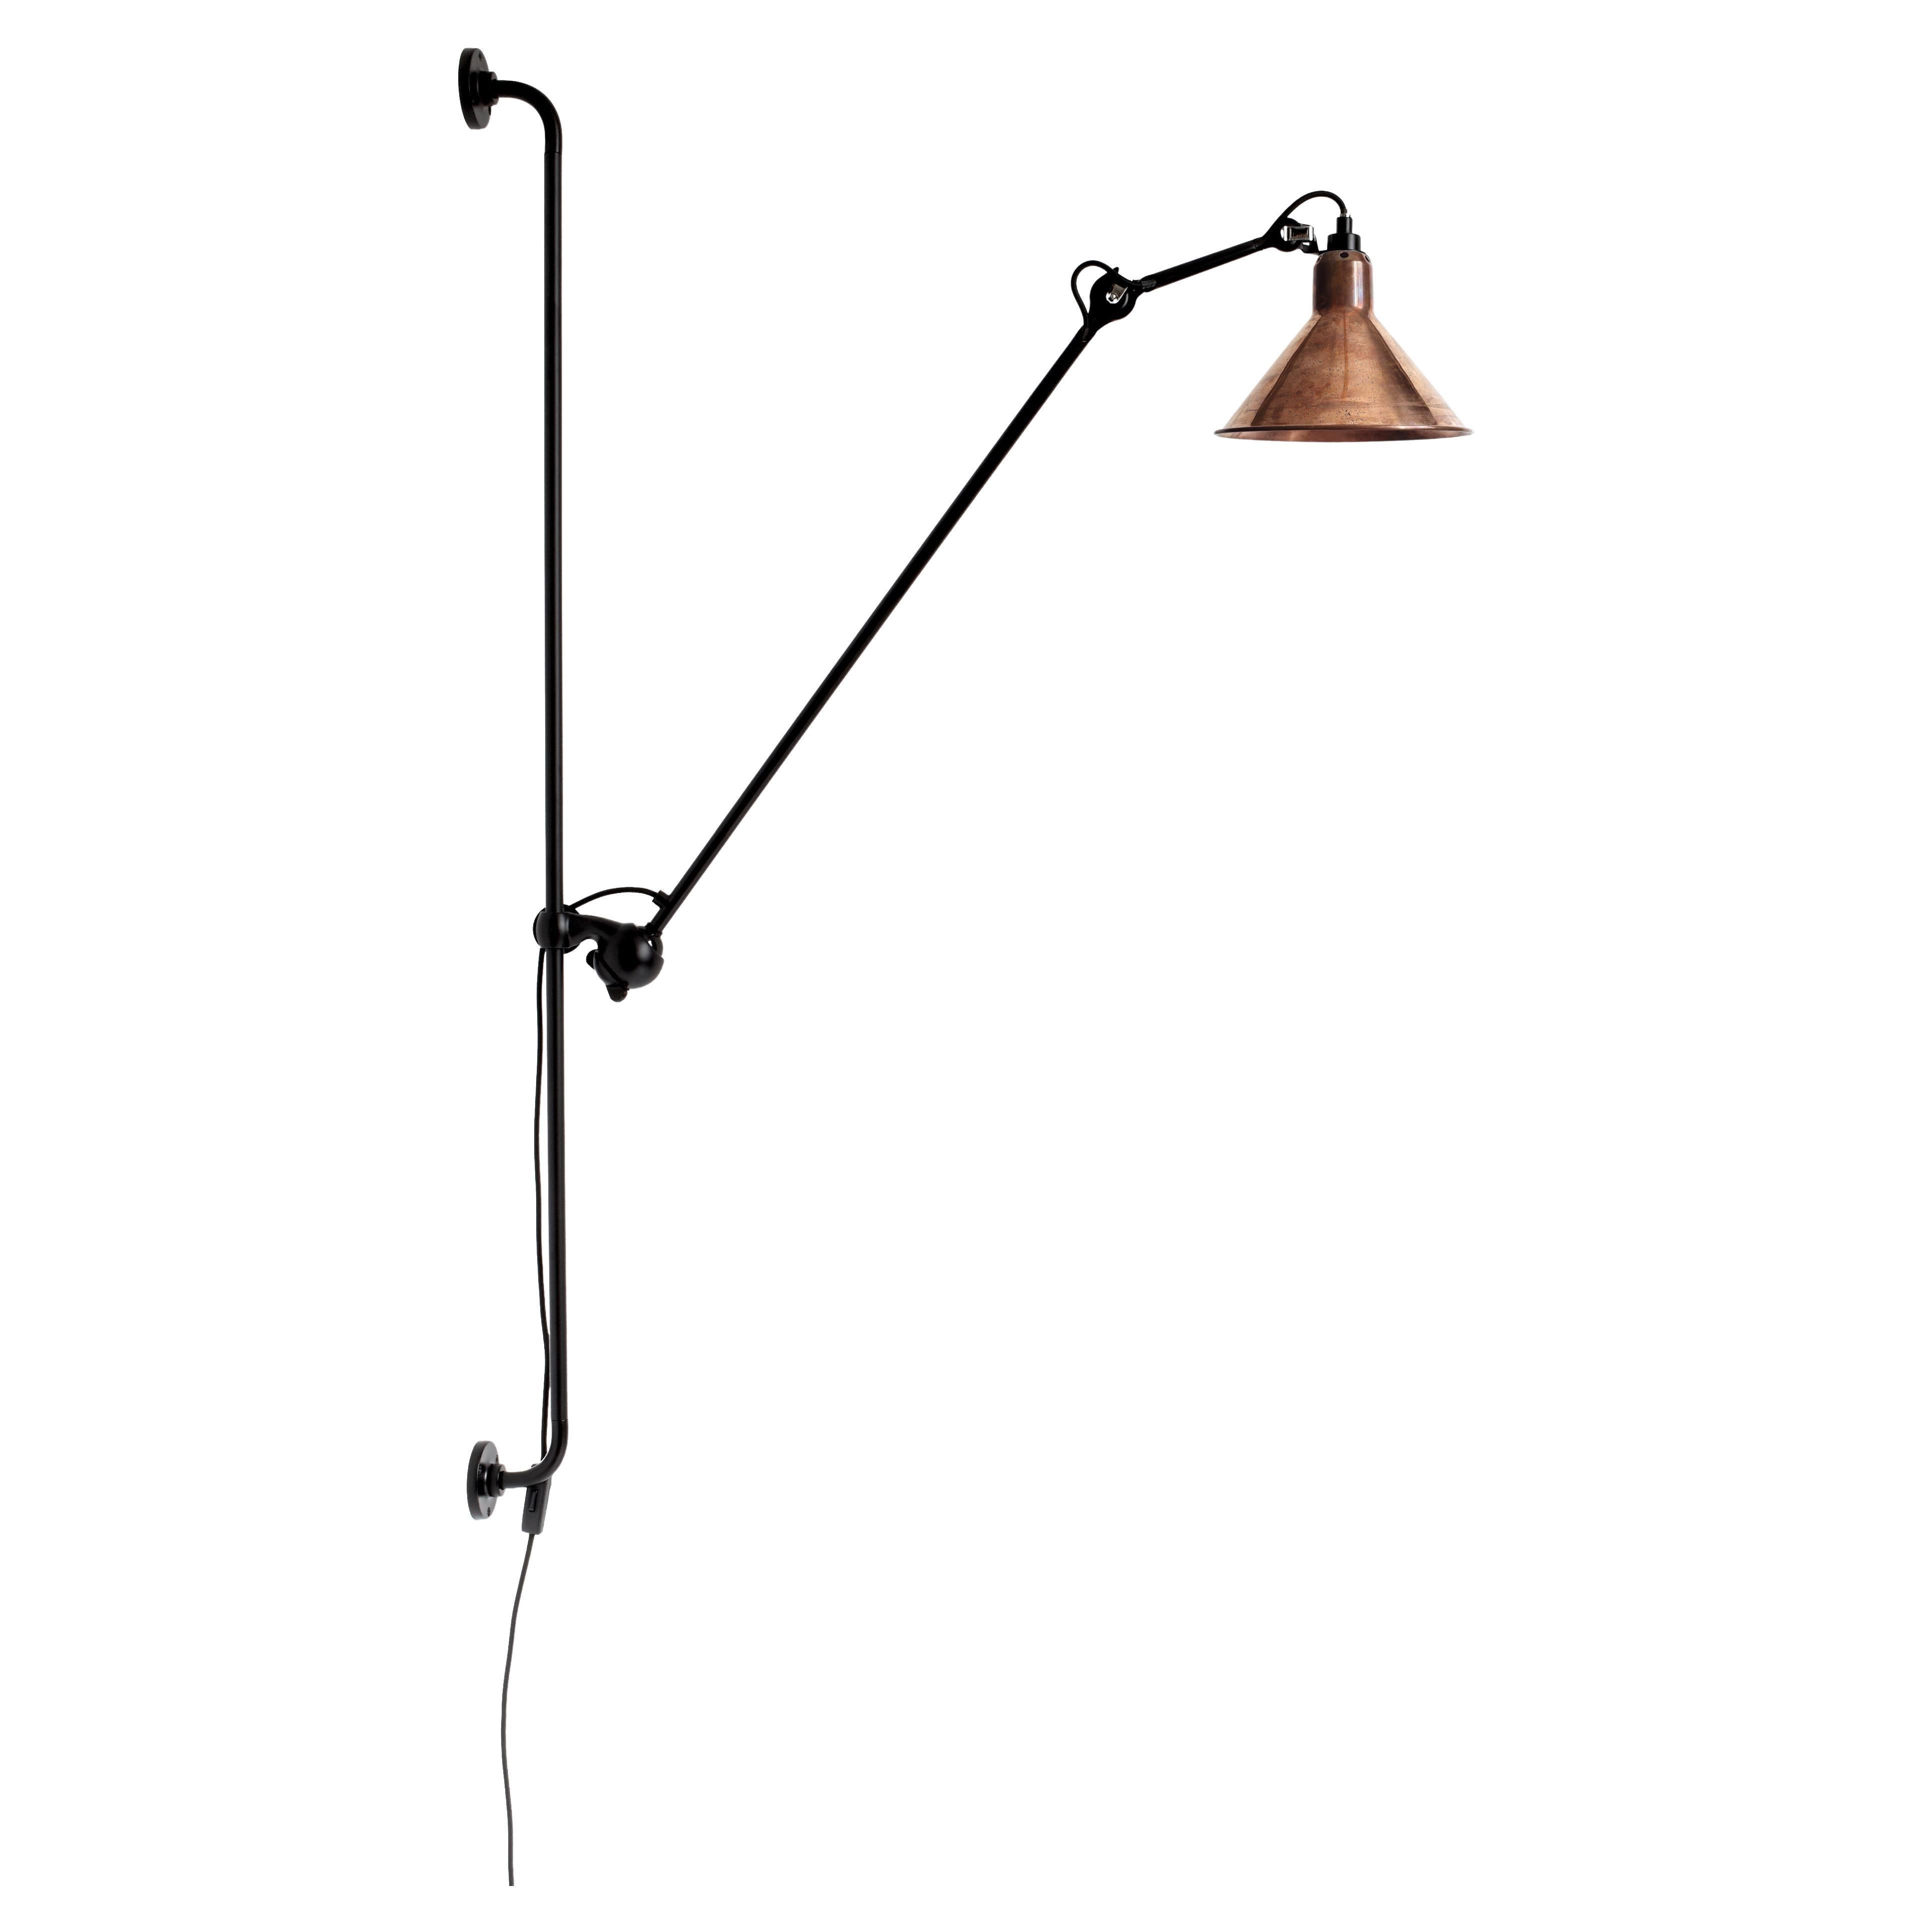 DCW Editions La Lampe Gras N°214 Conic Wall Lamp in Black Arm & Raw Copper Shade